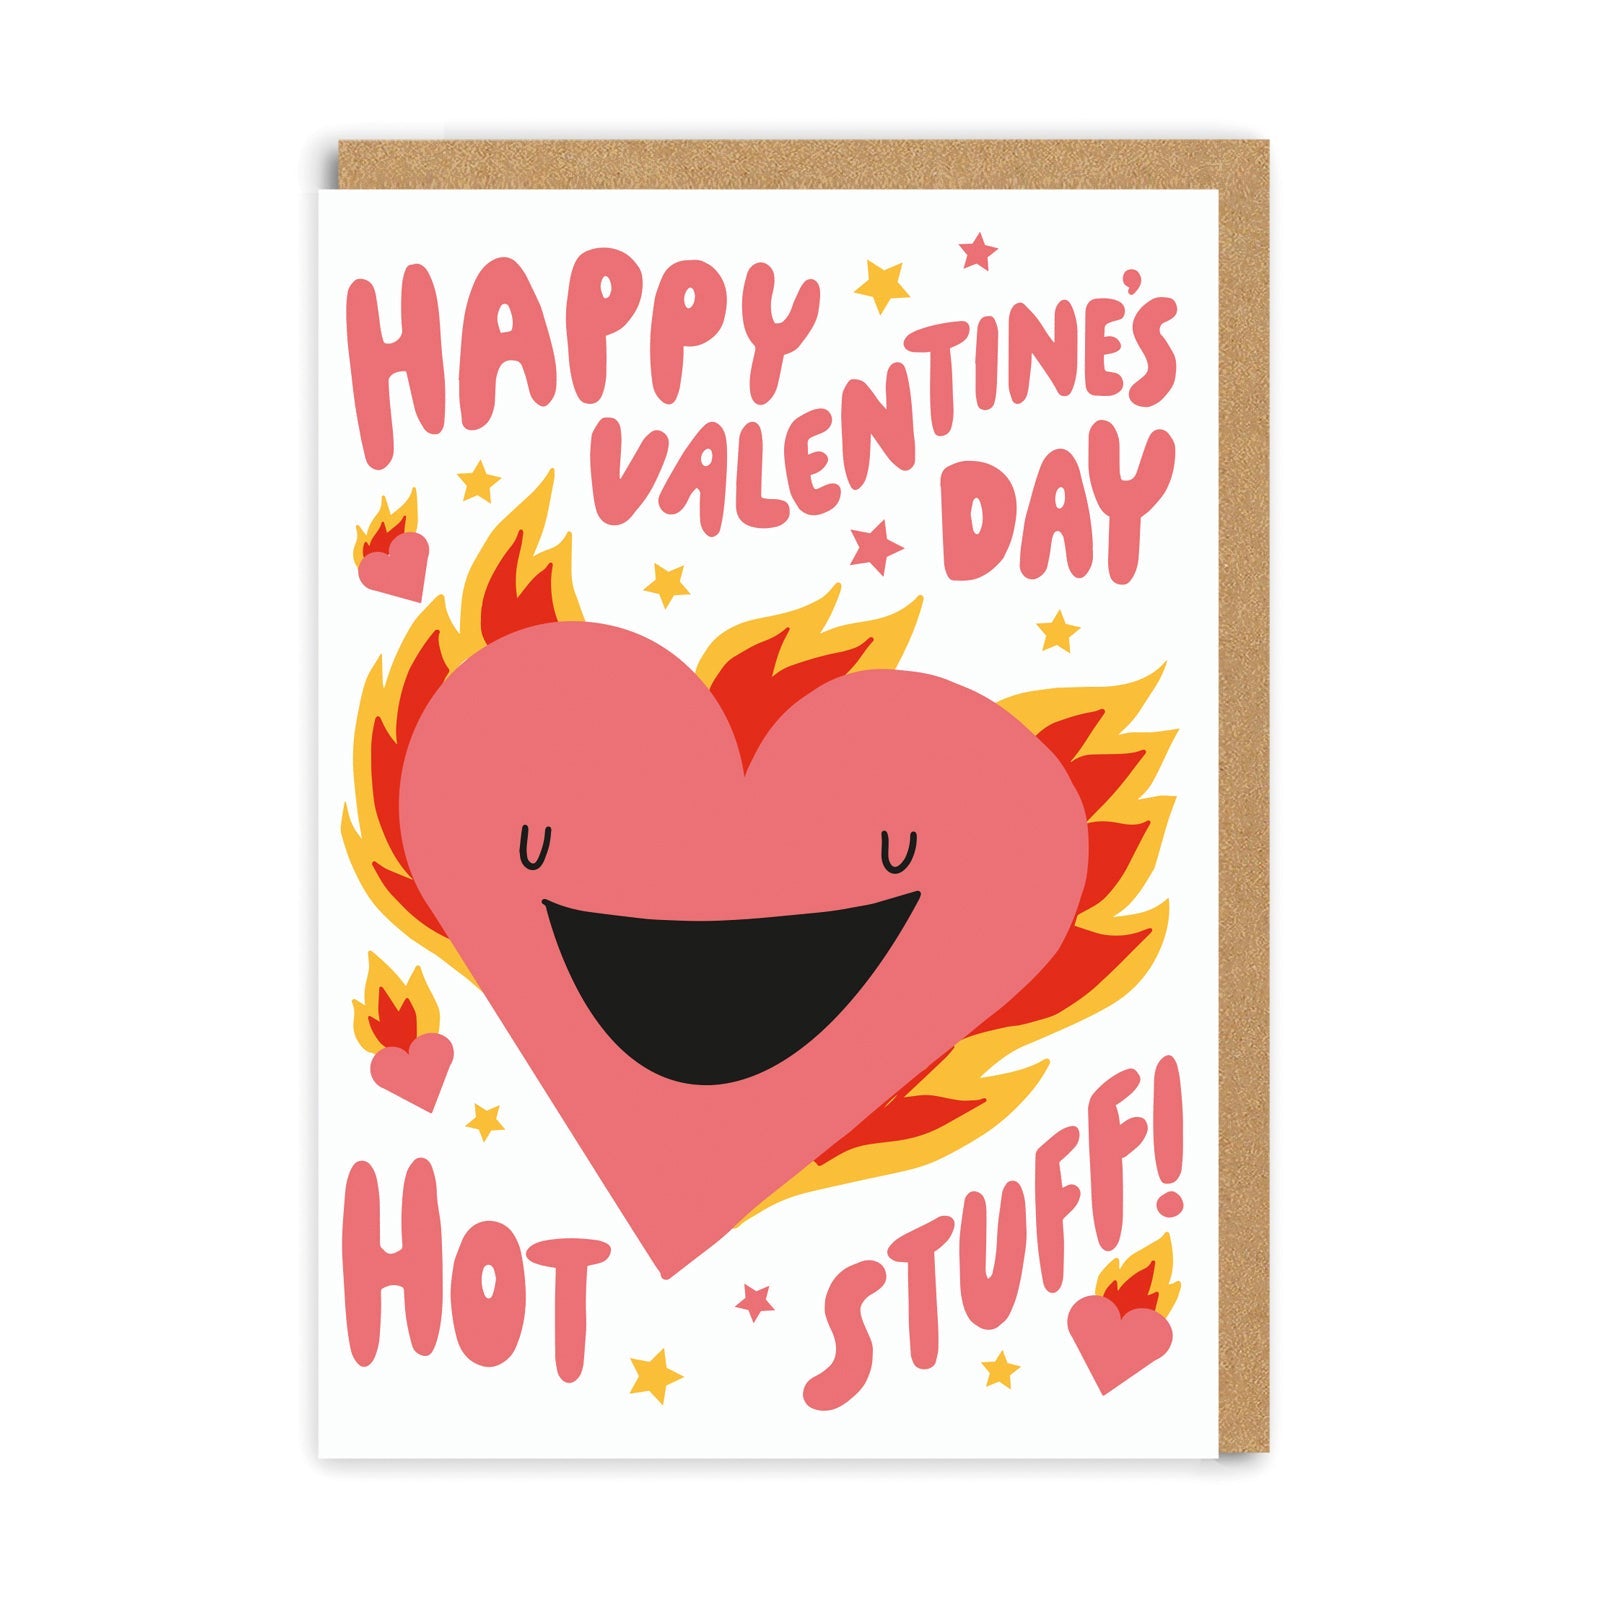 Valentine’s Day | Valentines Card For Him or Her | Happy Valentine’s Day Hot Stuff Greeting Card | Ohh Deer Unique Valentine’s Card | Artwork by Hello!Lucky! | Made In The UK, Eco-Friendly Materials, Plastic Free Packaging